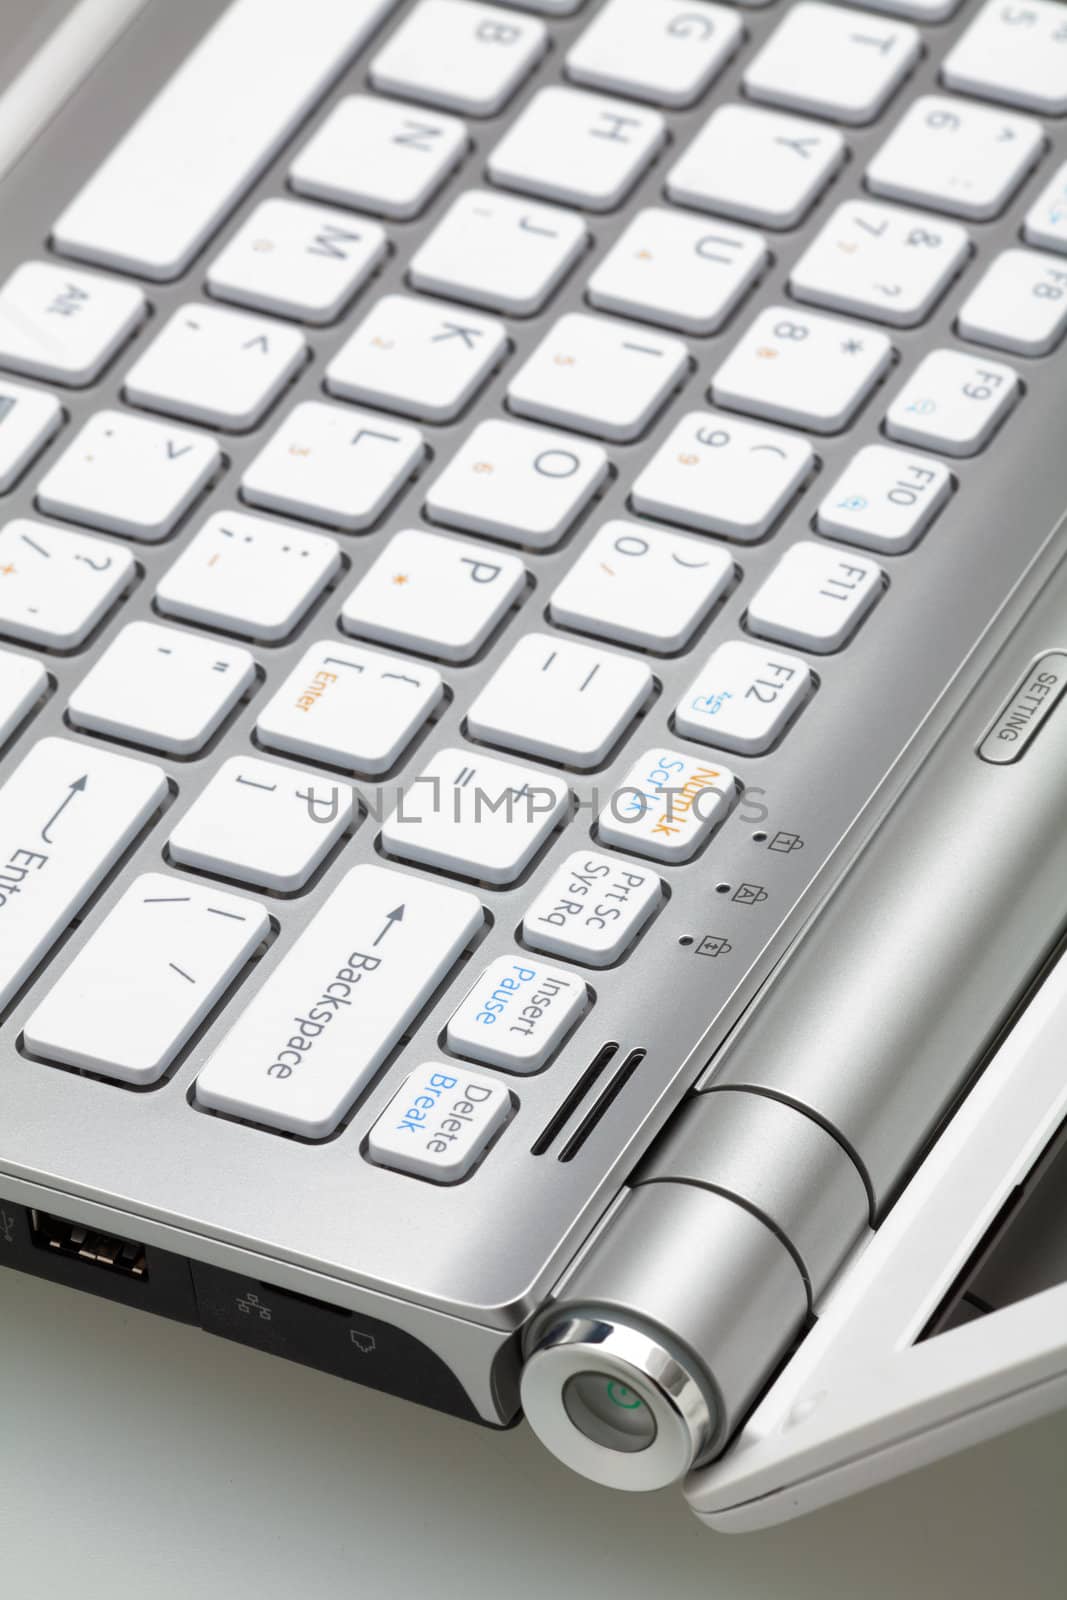 Silver laptop in the open form, a fragment of the keyboard